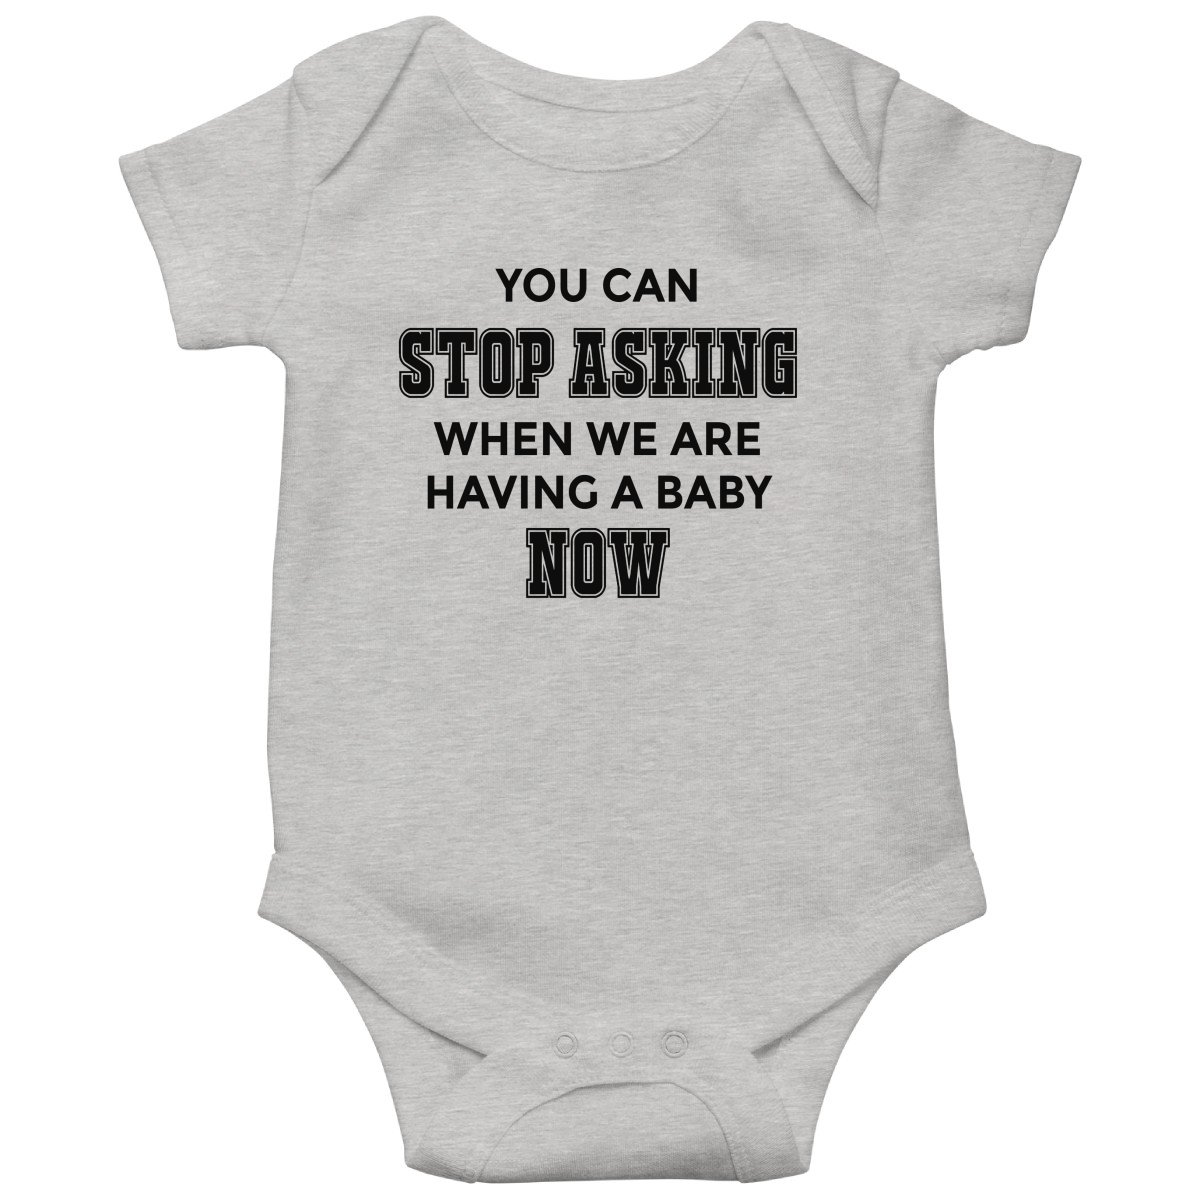 You can stop asking when we are having baby NOW Baby Bodysuits | Gray